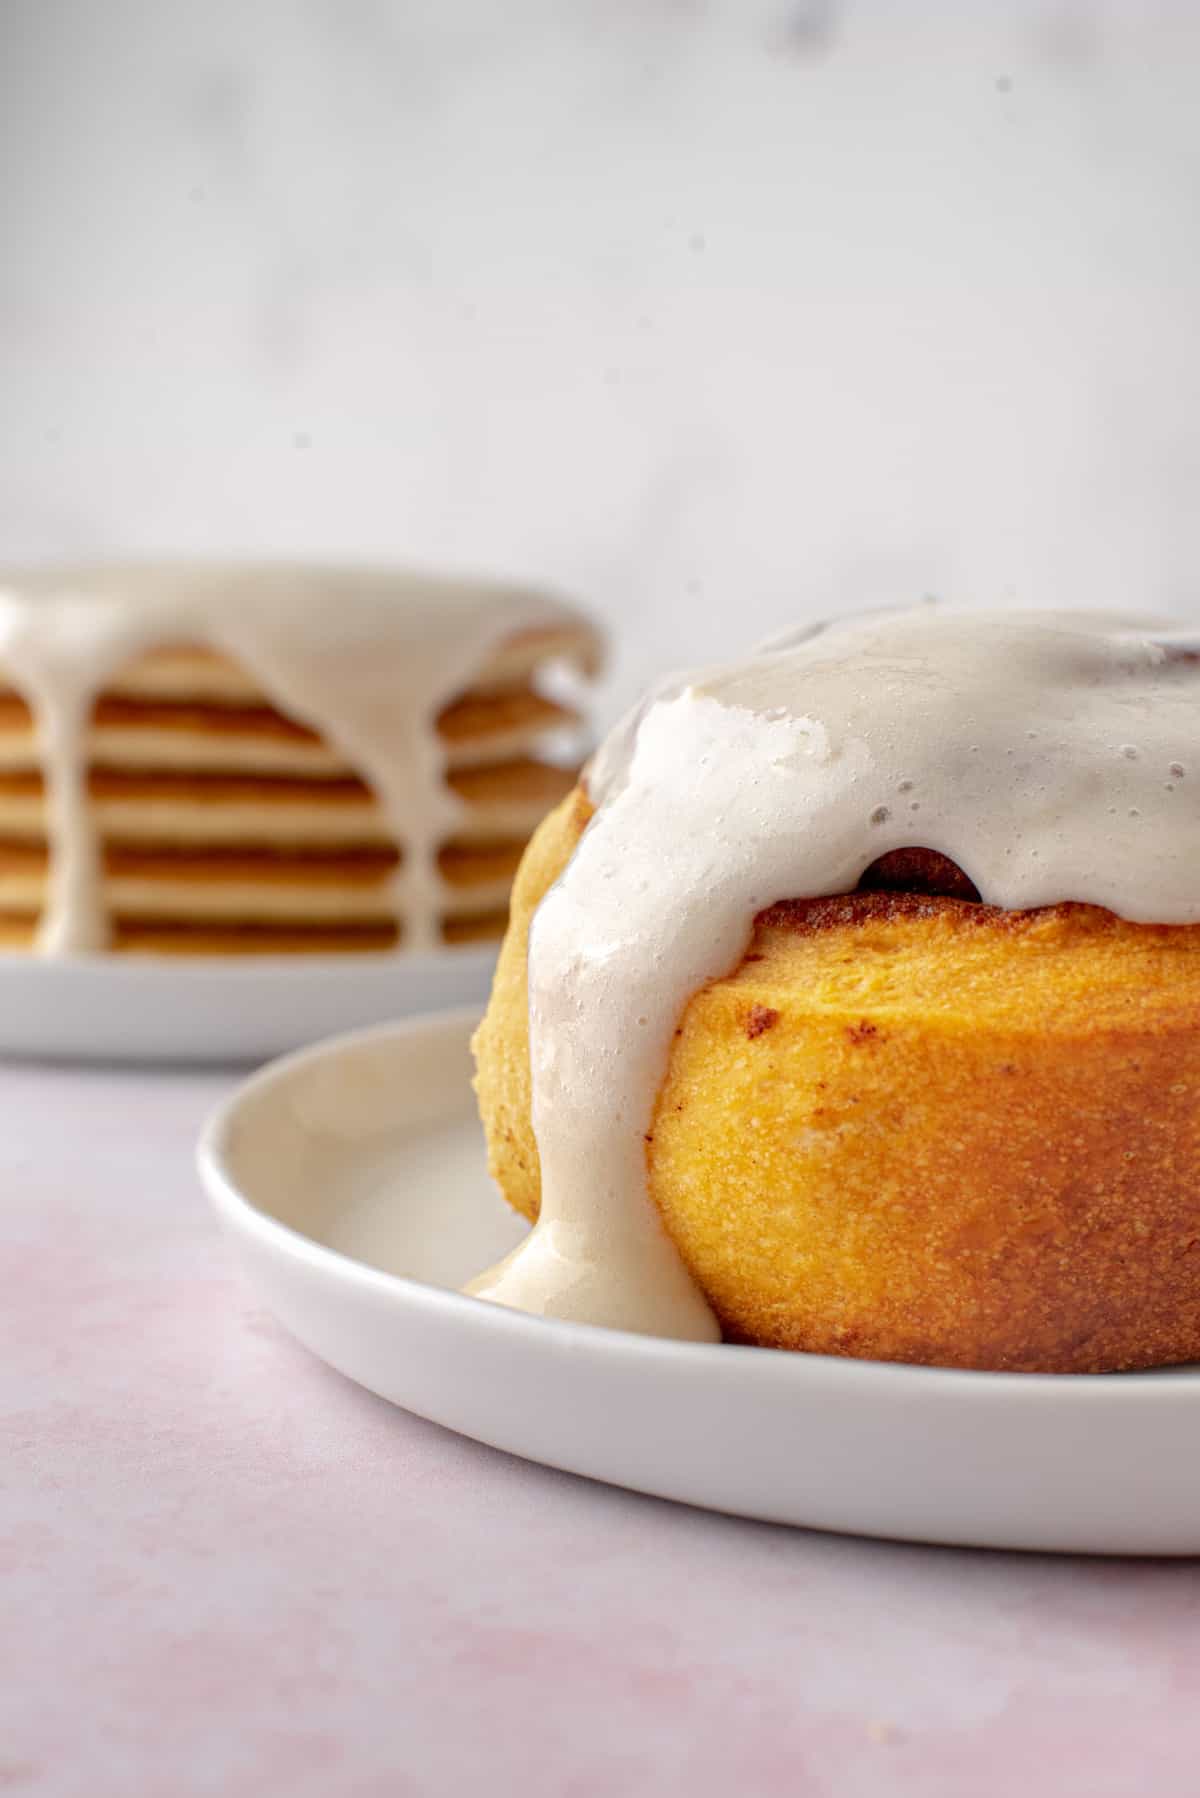 Cream cheese glaze on a cinnamon roll and a stack of pancakes.